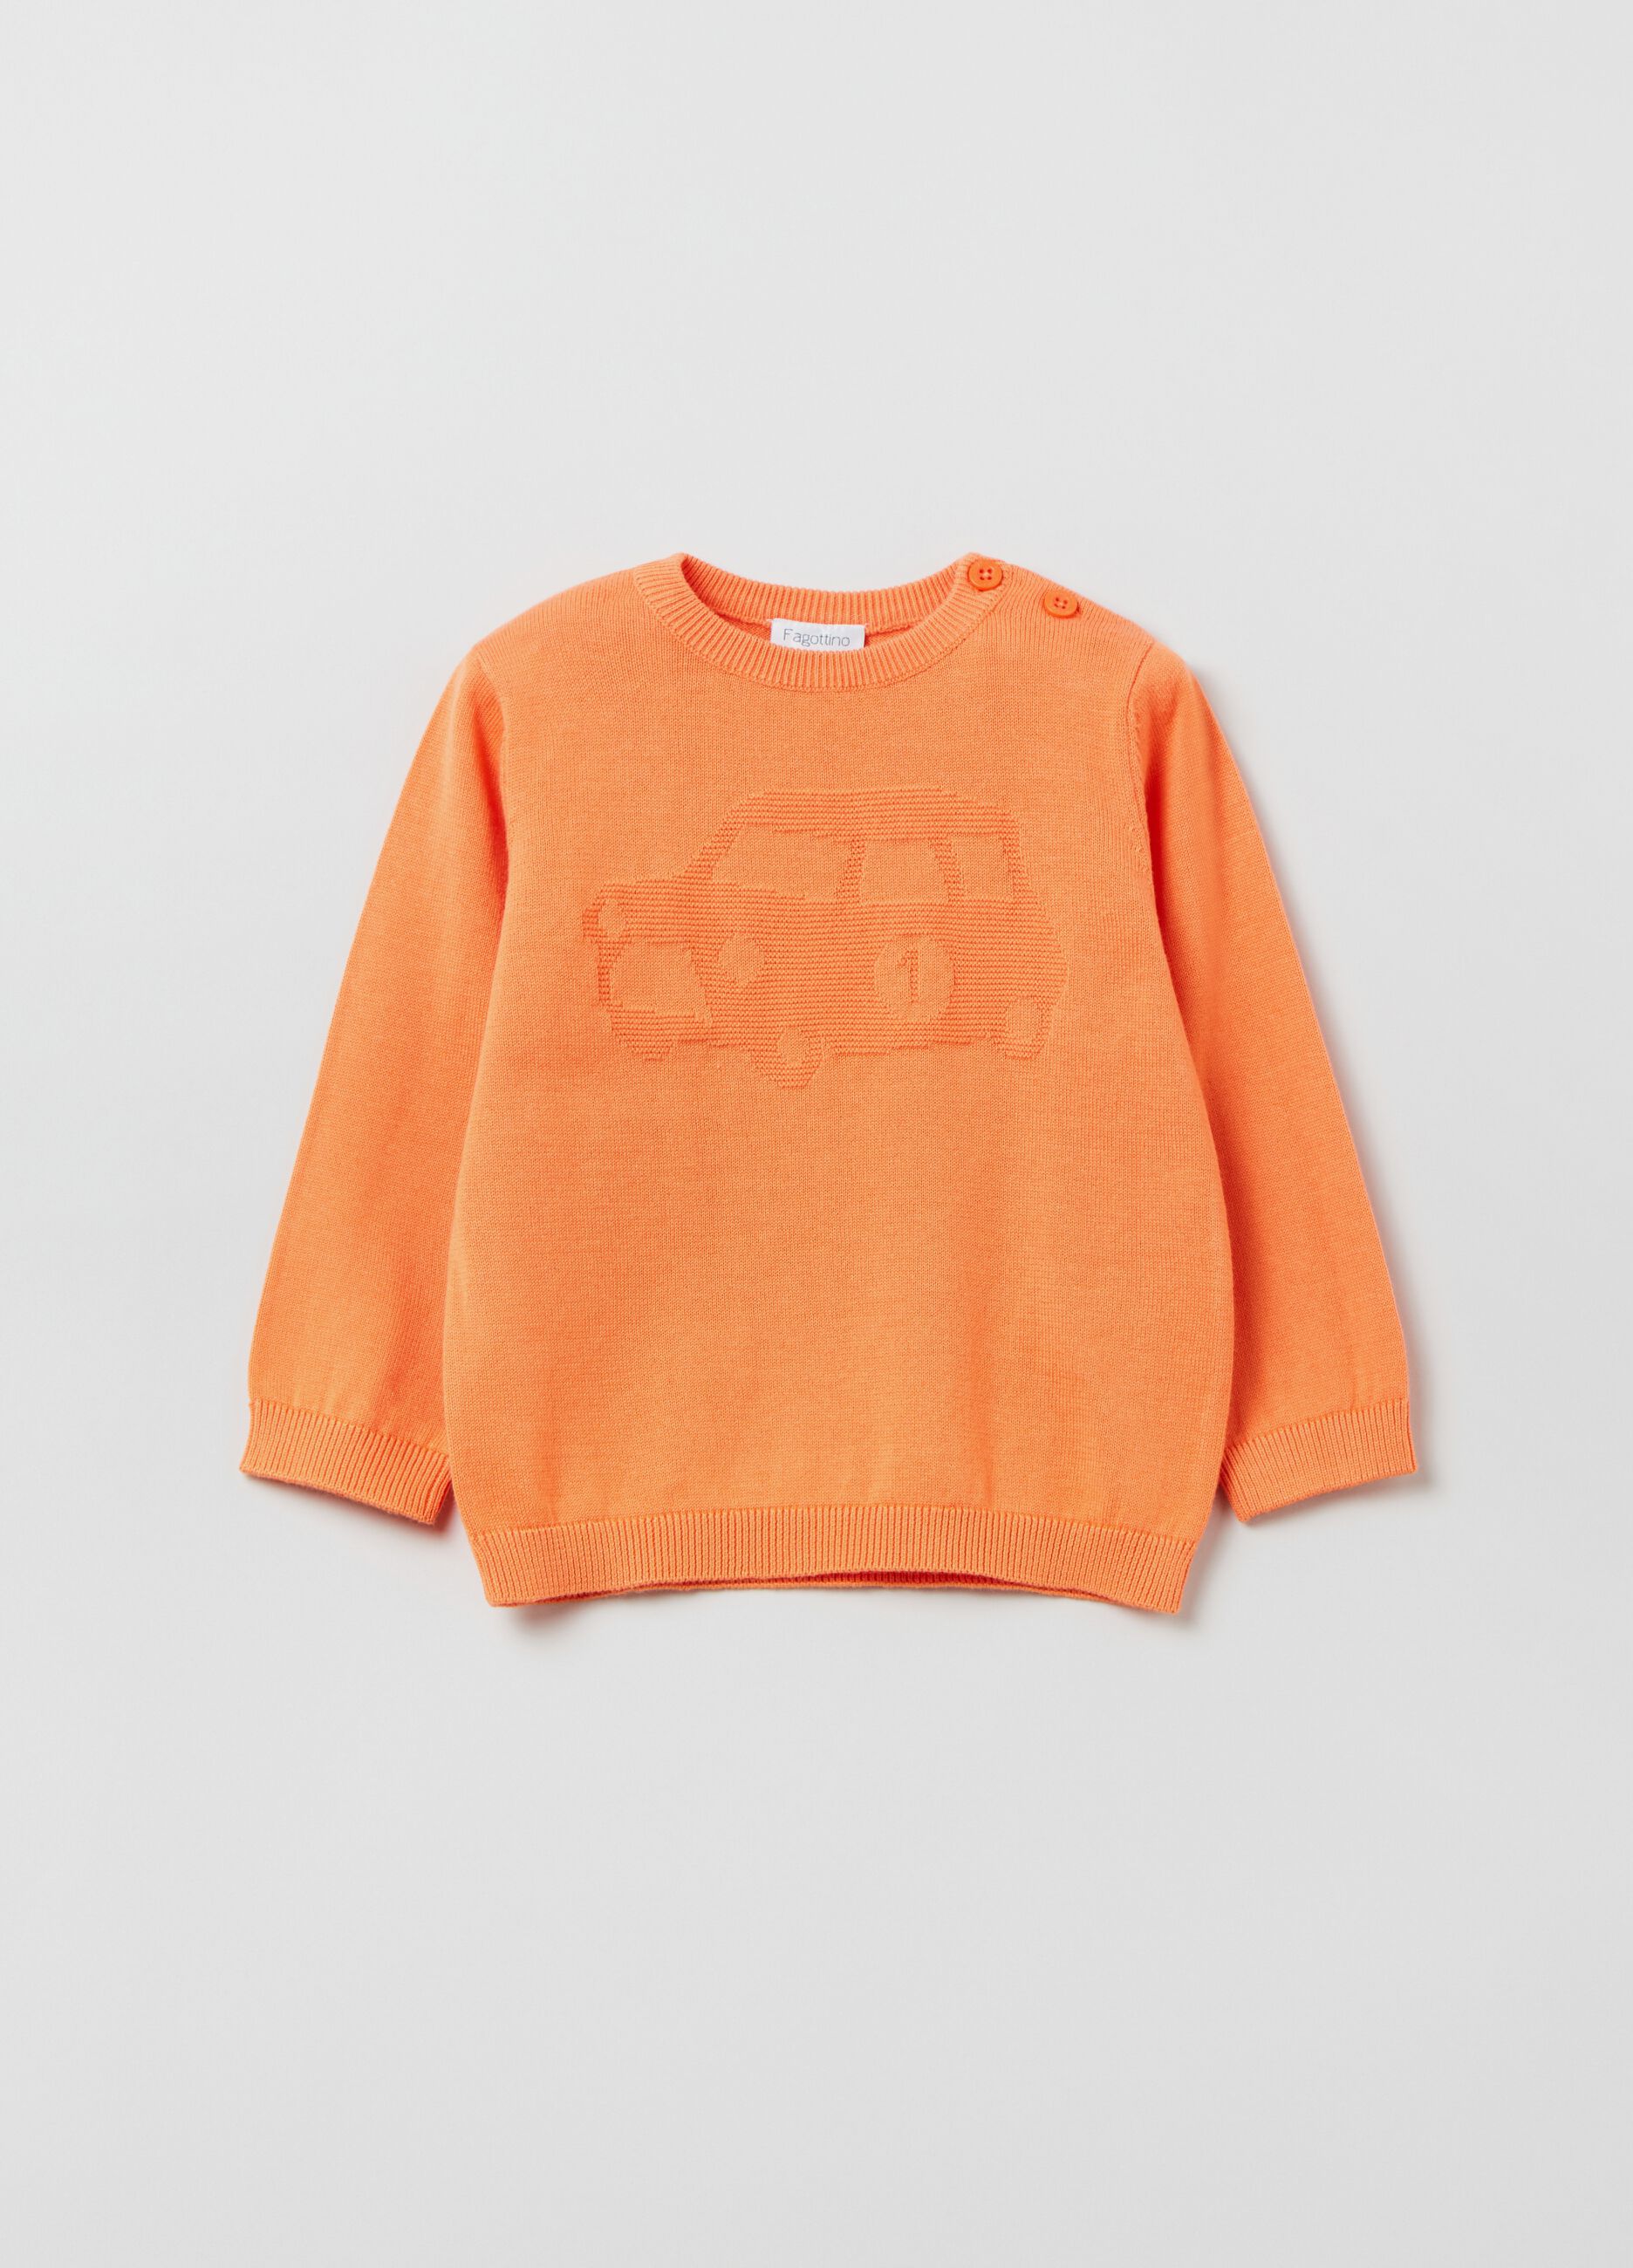 Cotton pullover with toy car